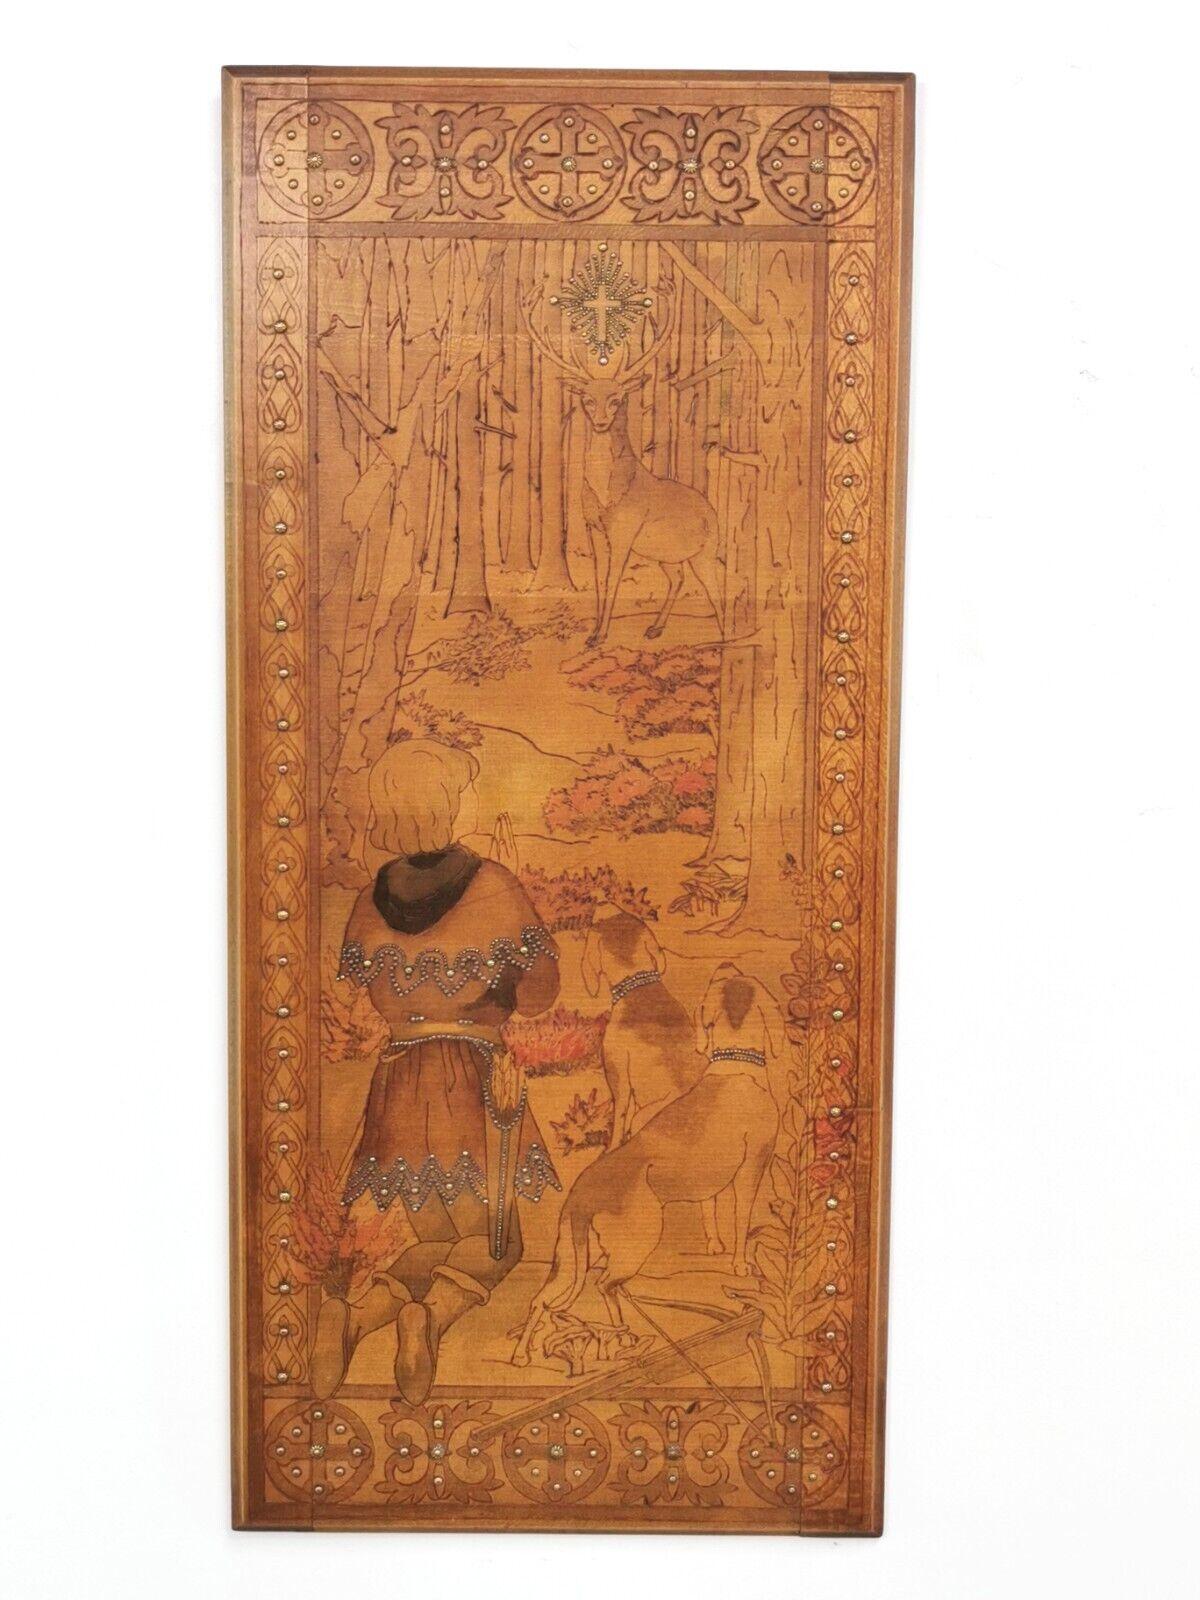 Religious wall panel.

Handmade carved wood early 20th century Art Nouveau studded wall panel alphonse mucha style.

Available to buy is an early 20th century Art Nouveau studded handmade carved wood wall panel in the style of Alphonse Mucha